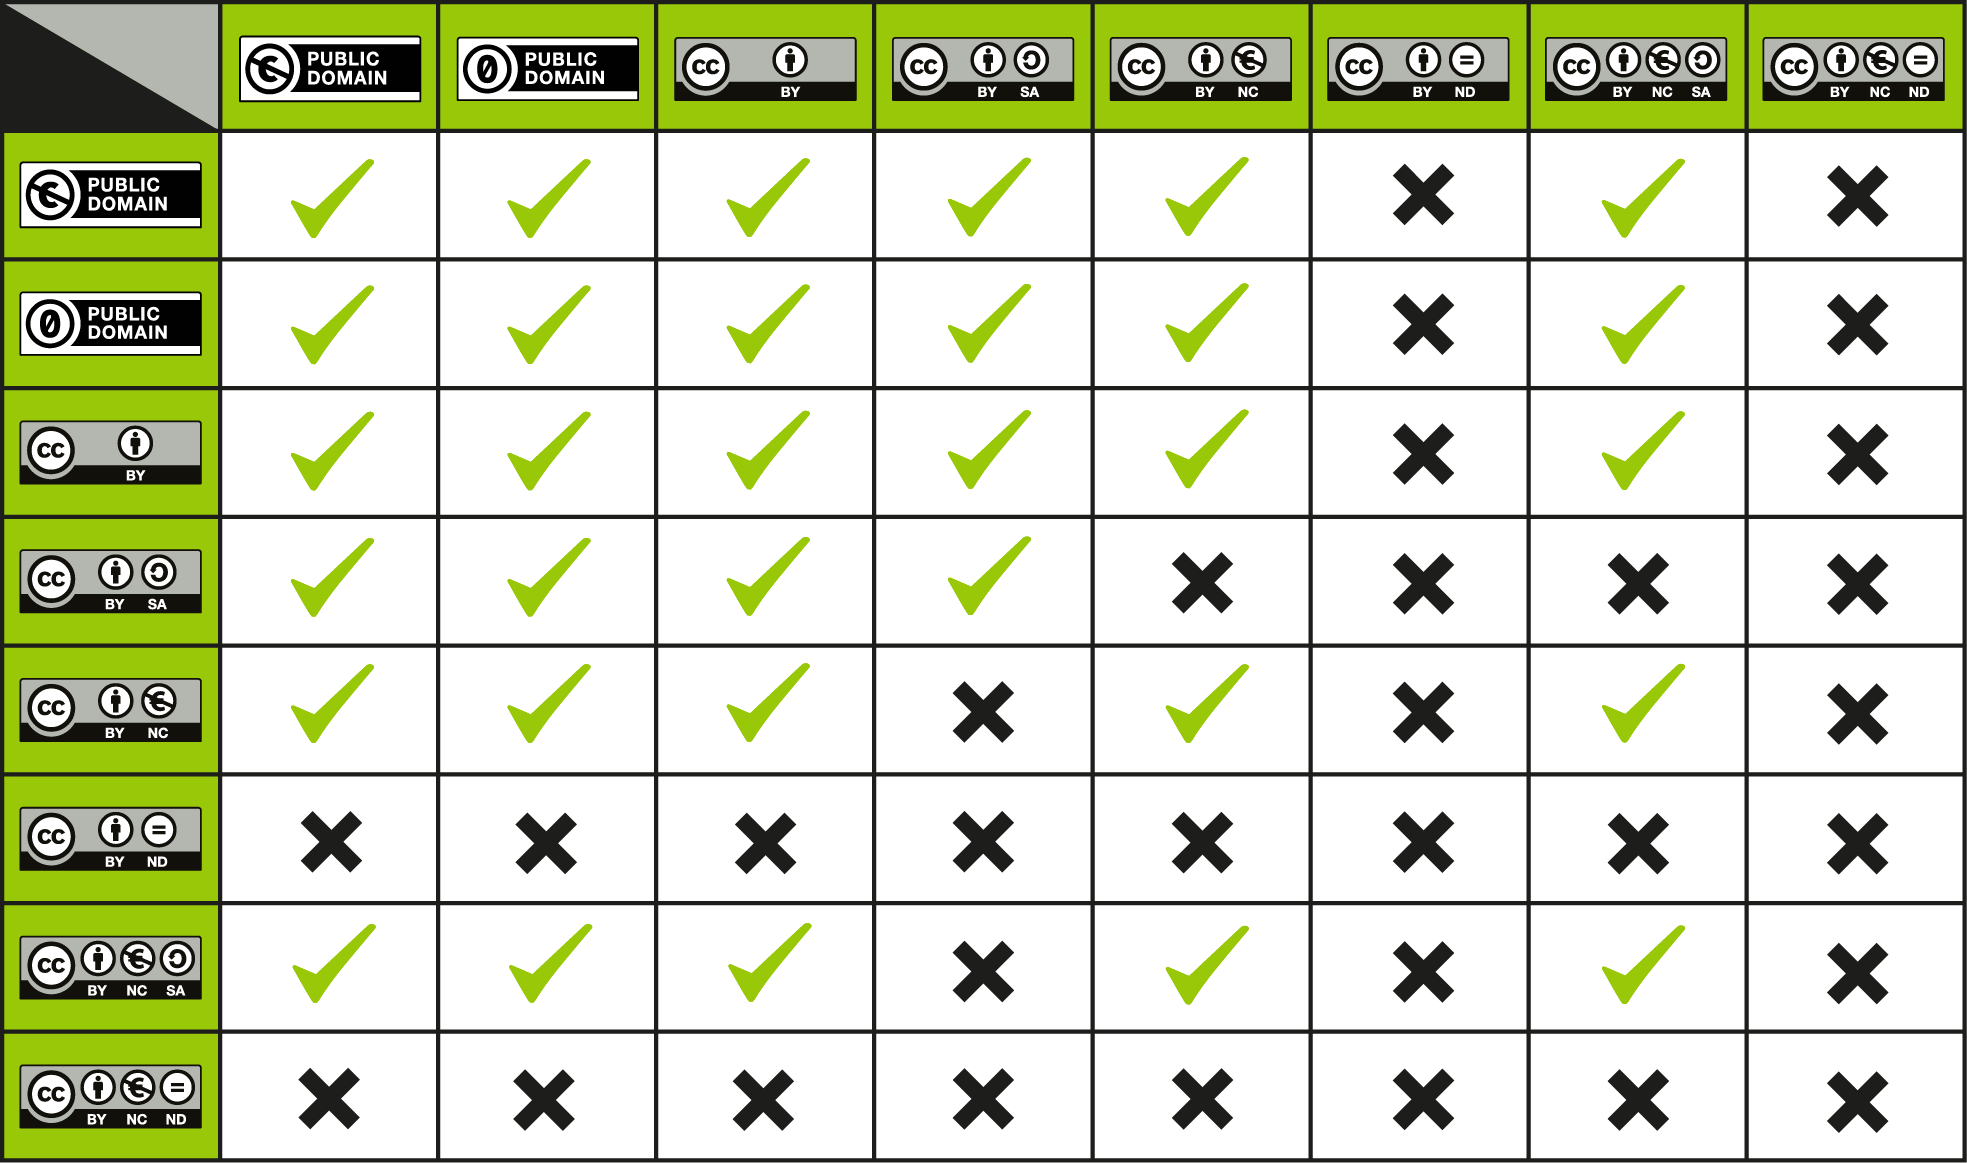 CC_License_Compatibility_Chart.png